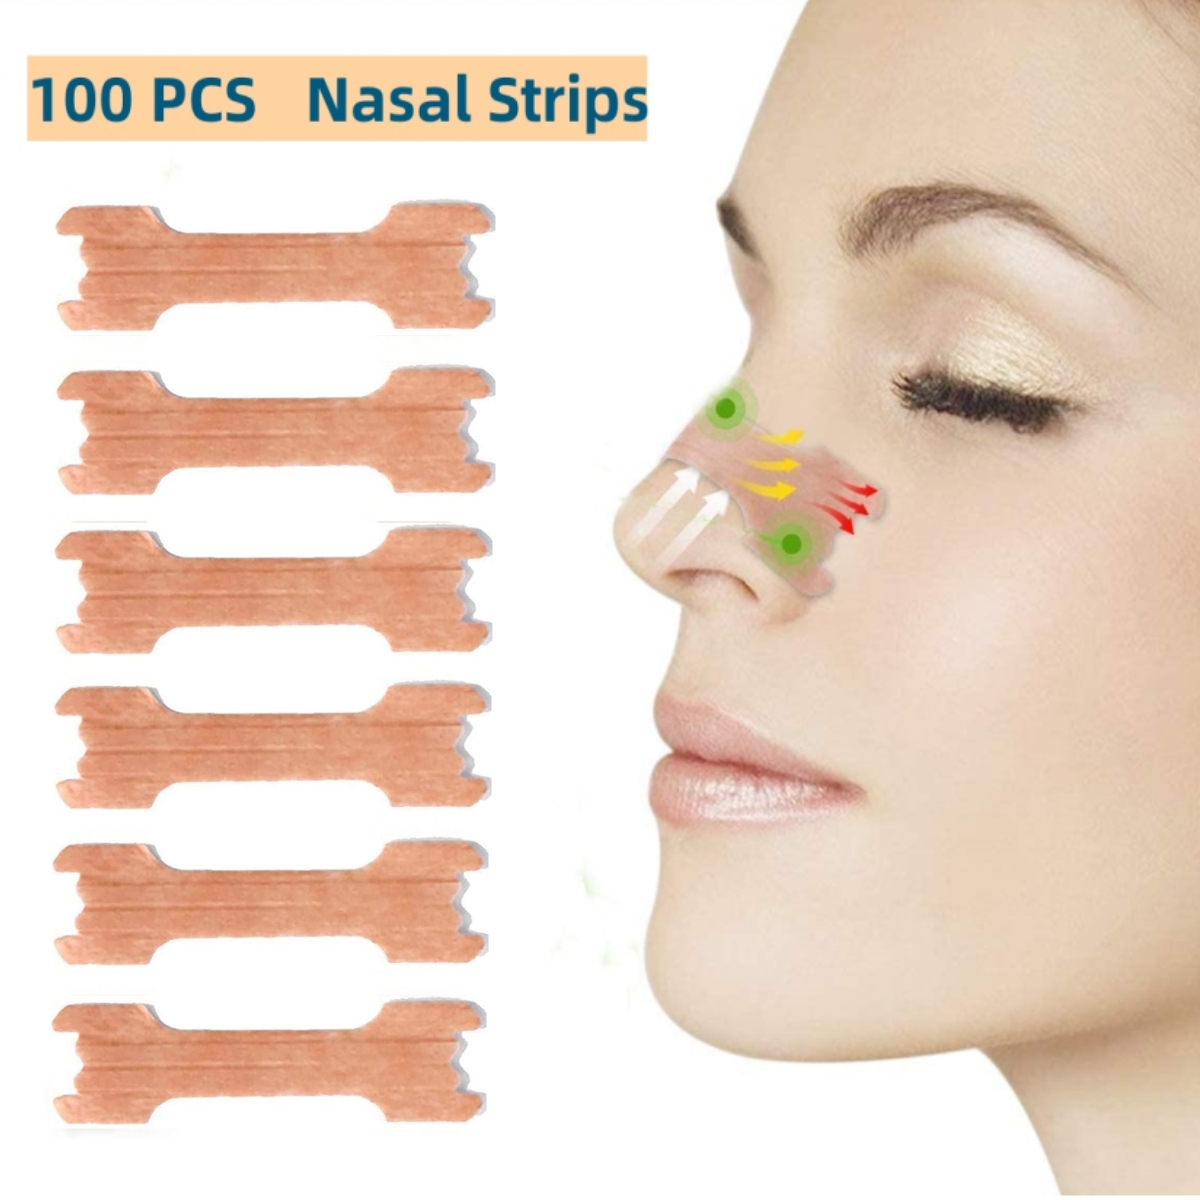 Strips Gentle Mouth Tape Better Nose Breathing Instant Snoring Reliefs